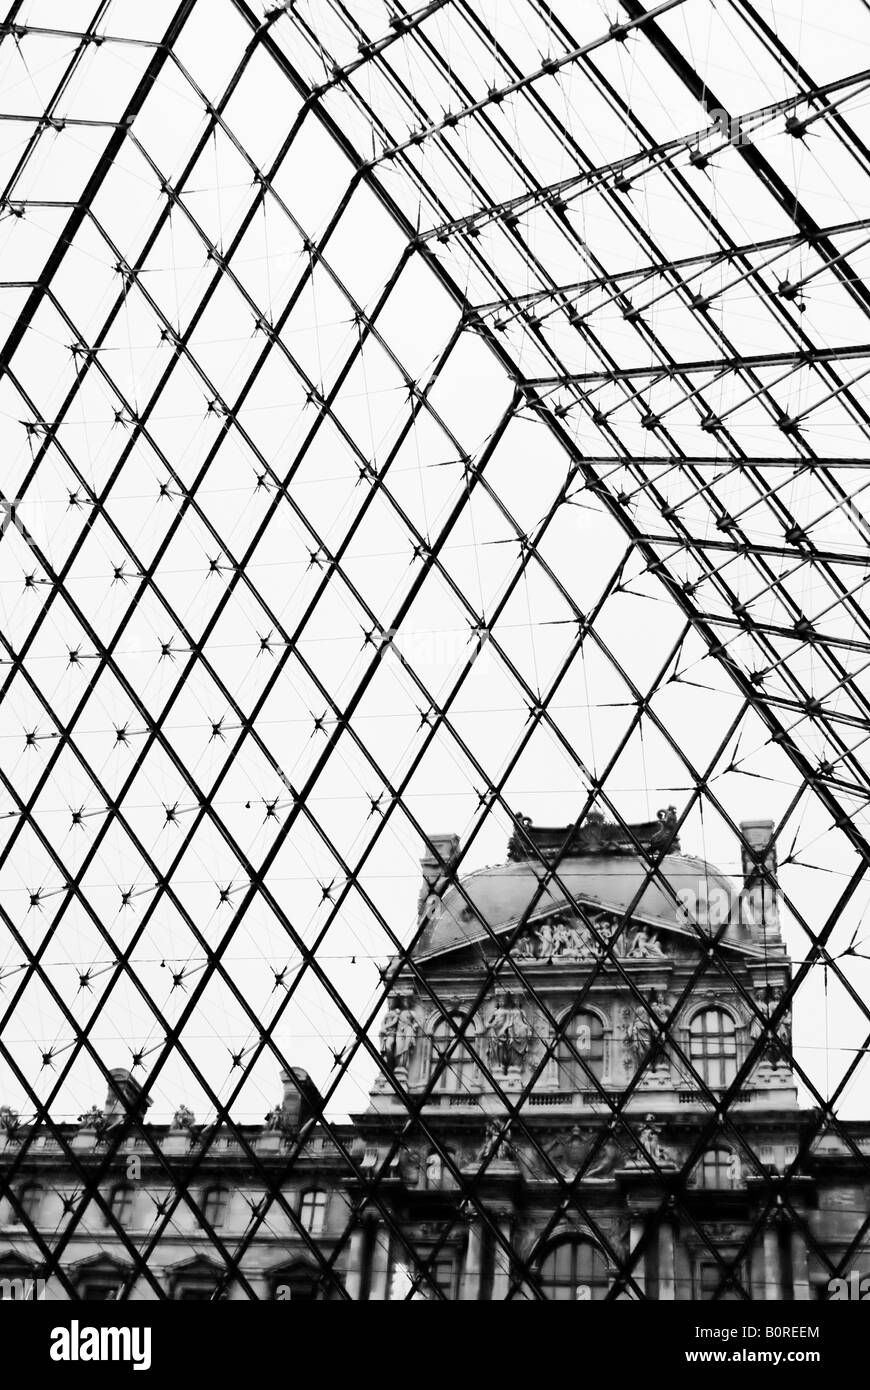 Upward view looking through the glass pyramid of the Louvre Museum in Paris France Stock Photo